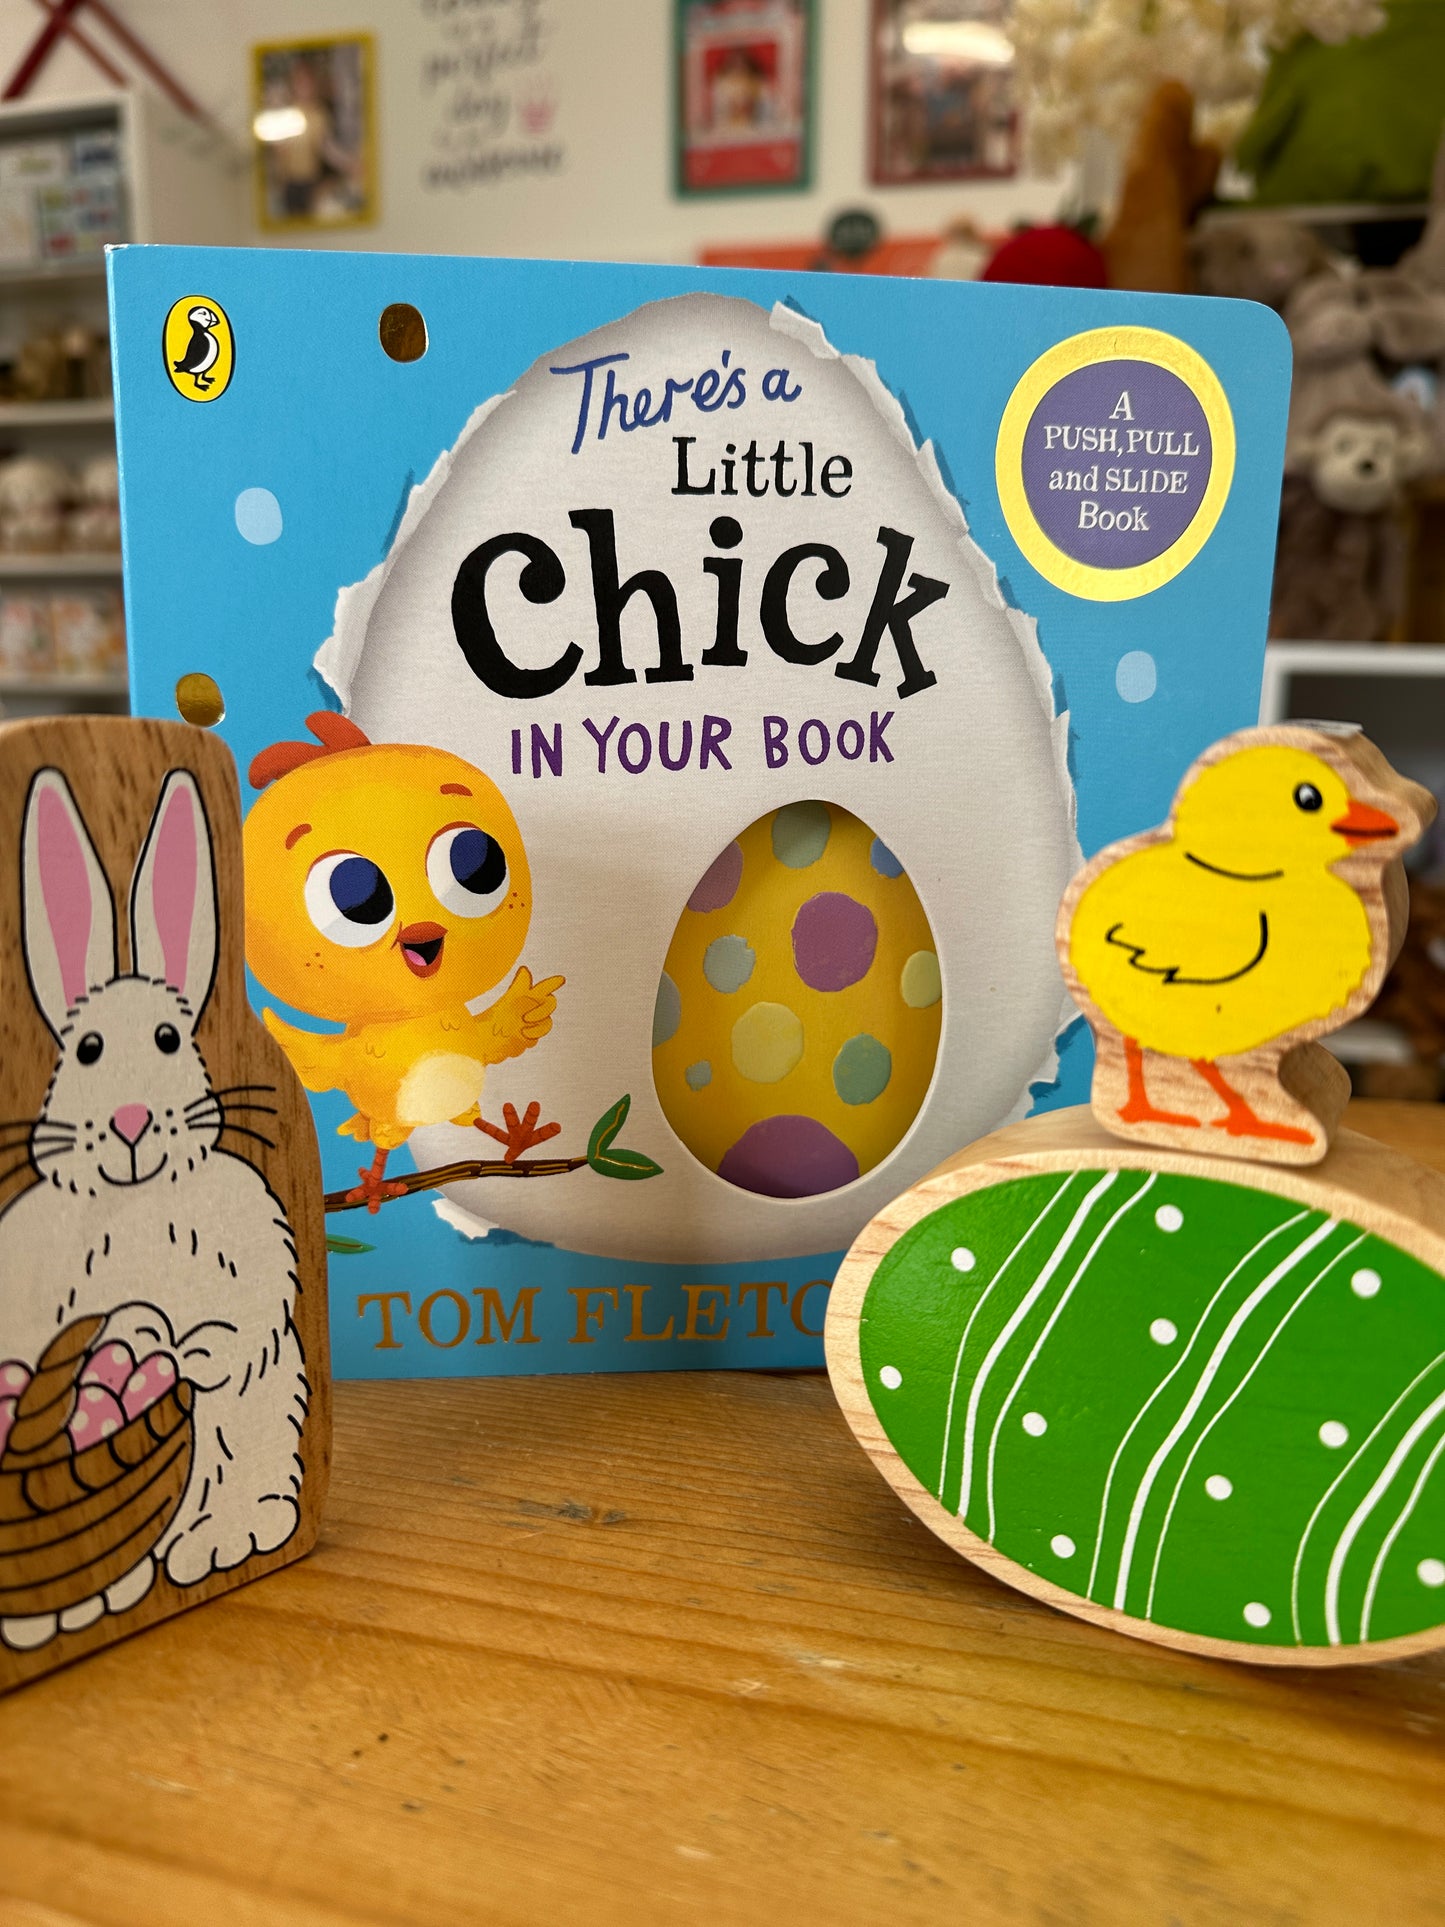 There's a chick in your book Set